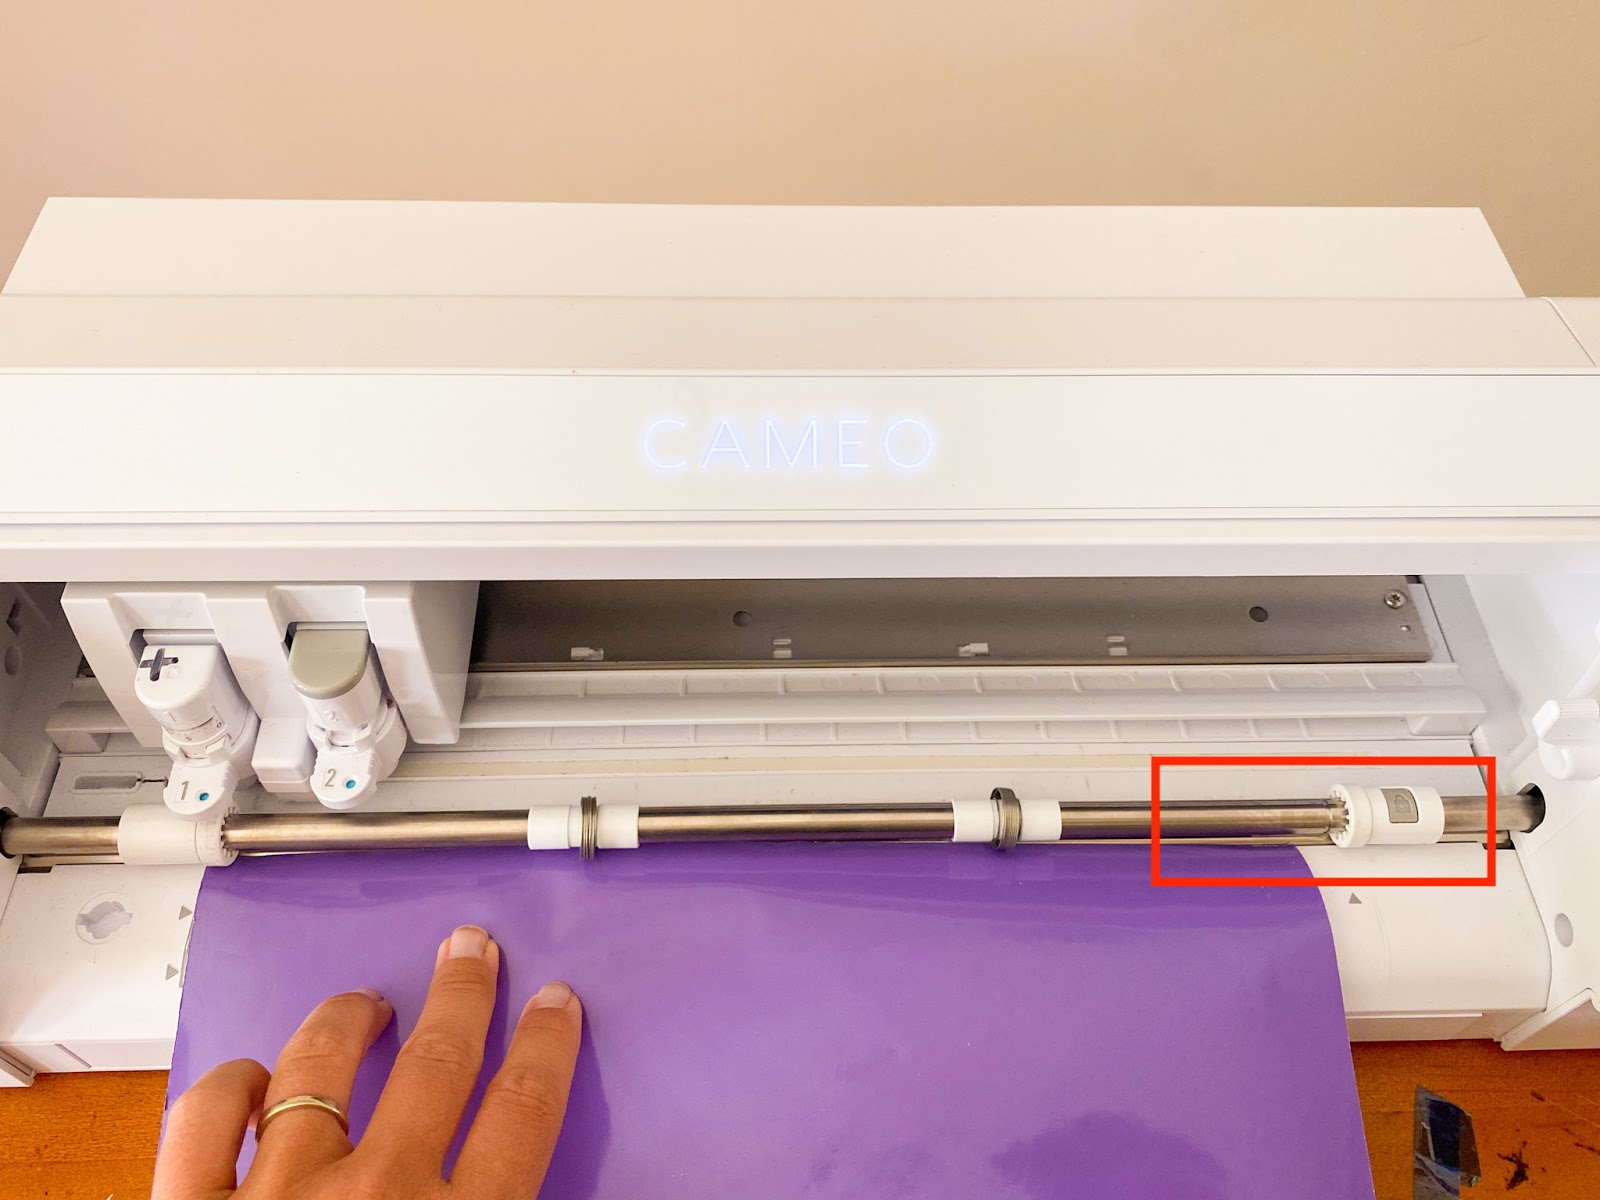 Troubleshooting Cutting Problems with your Silhouette Cameo 3 